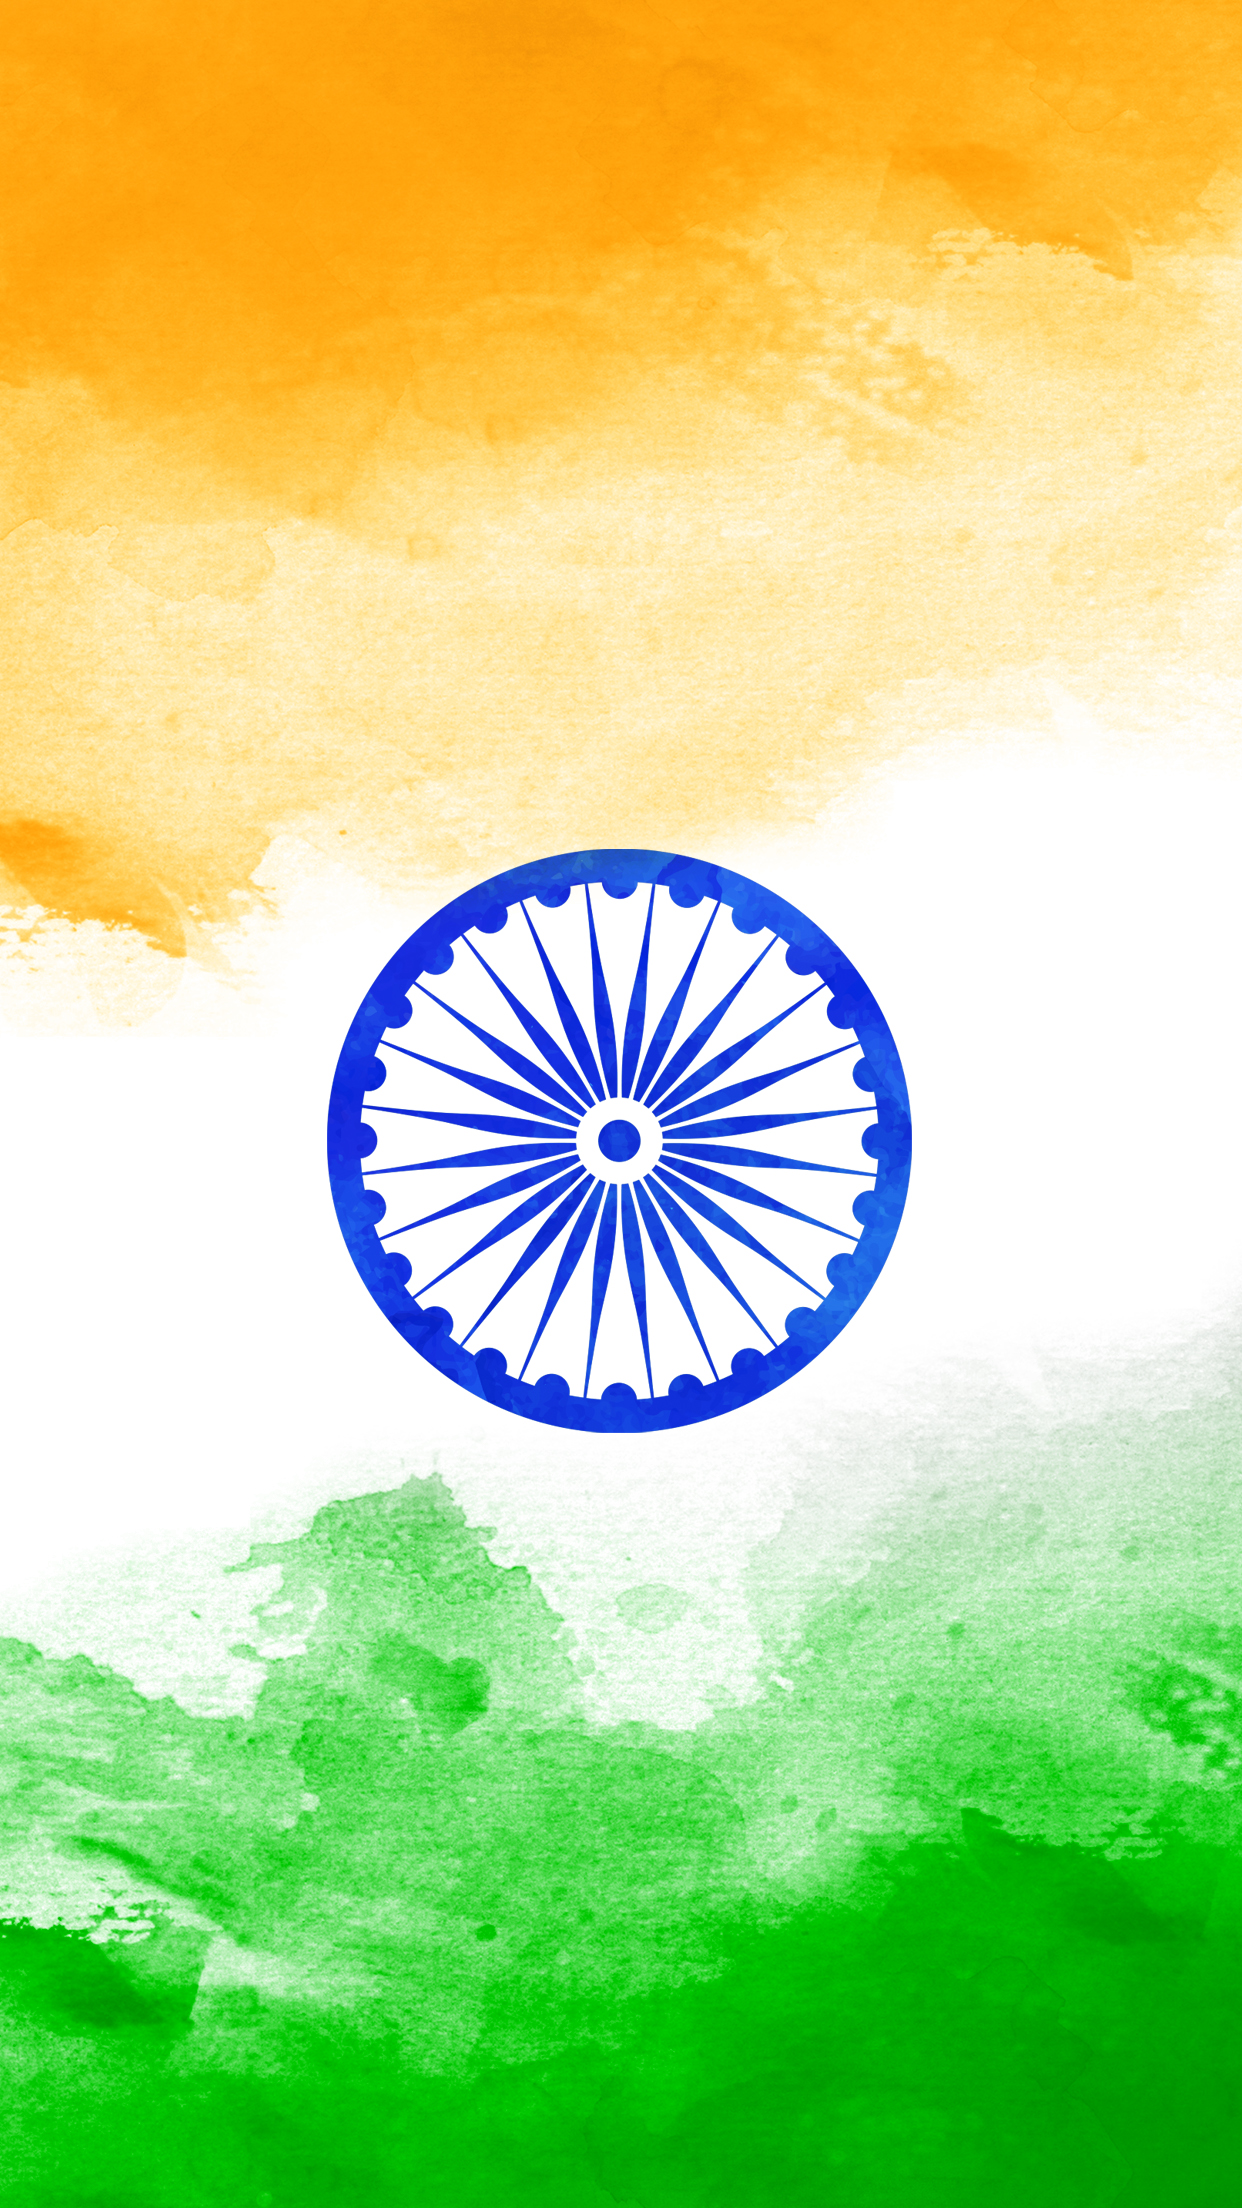 Indian Independence Day 2019 - 800x1423 Wallpaper 